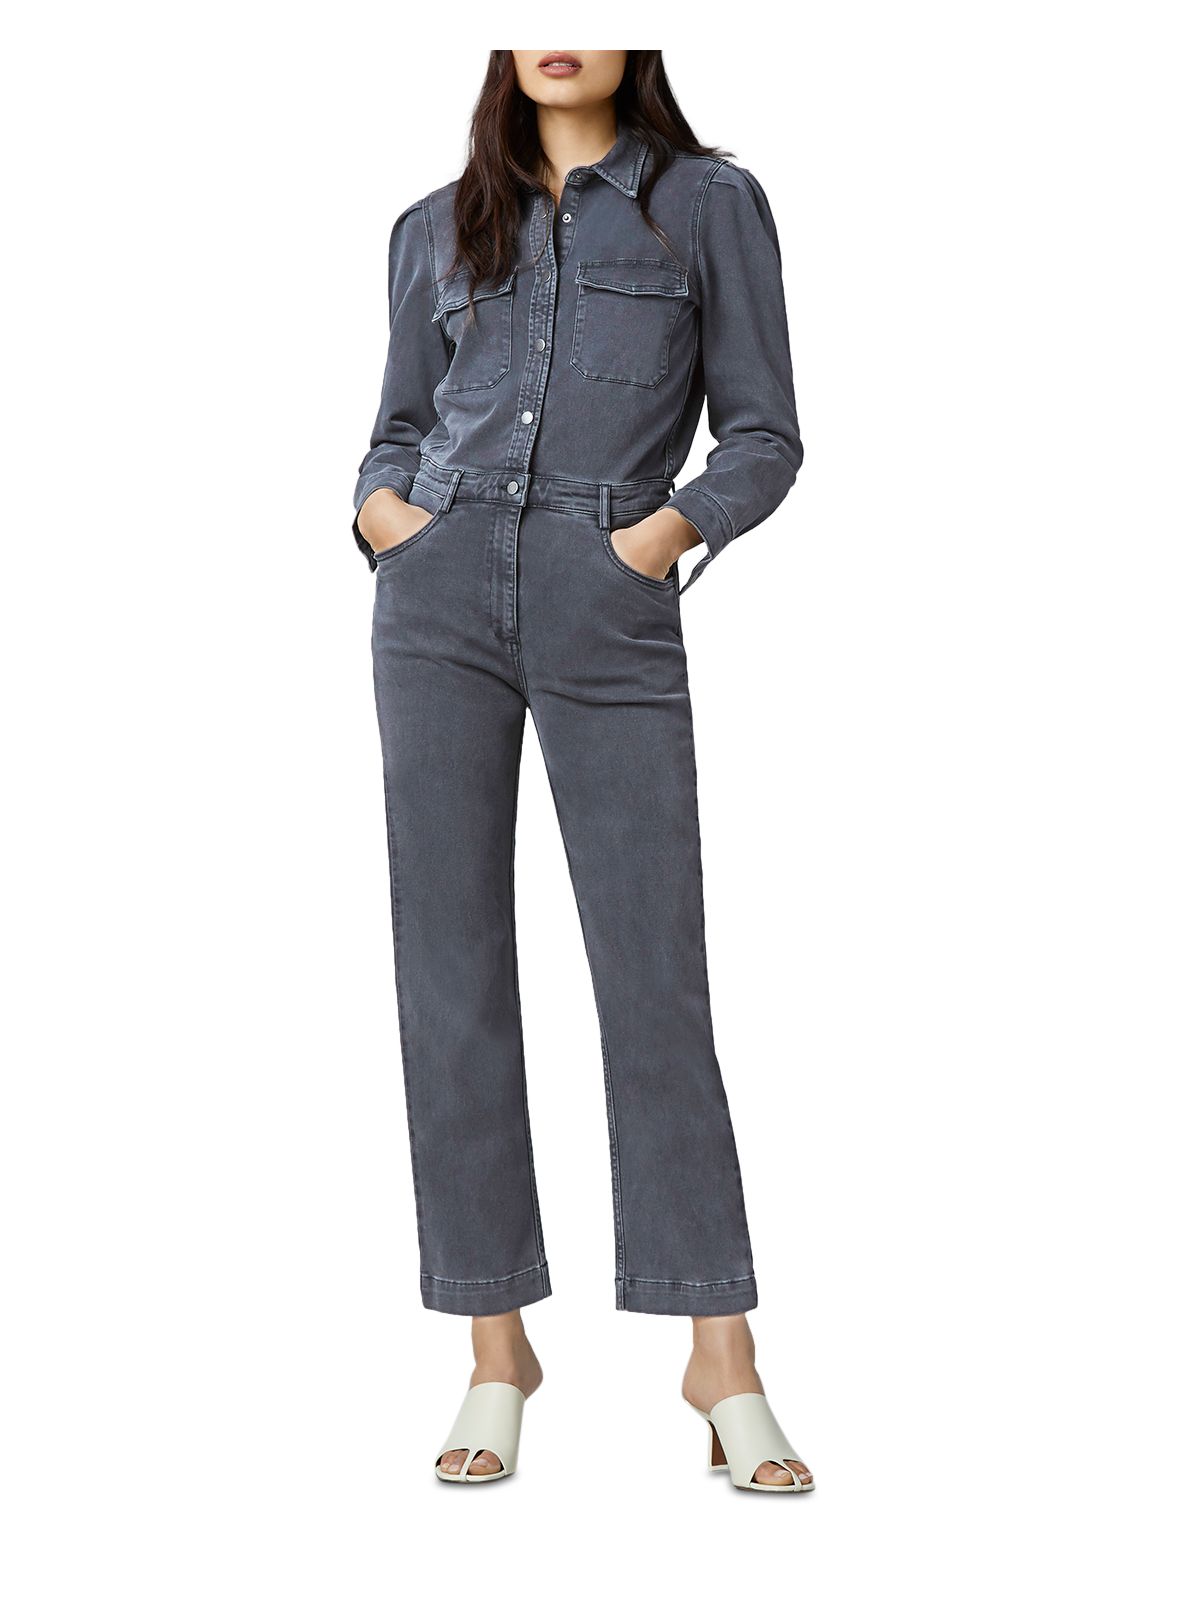 DL1961 Womens Gray Stretch Pocketed Zippered Front Snap Coveralls Long Sleeve Collared Jumpsuit M